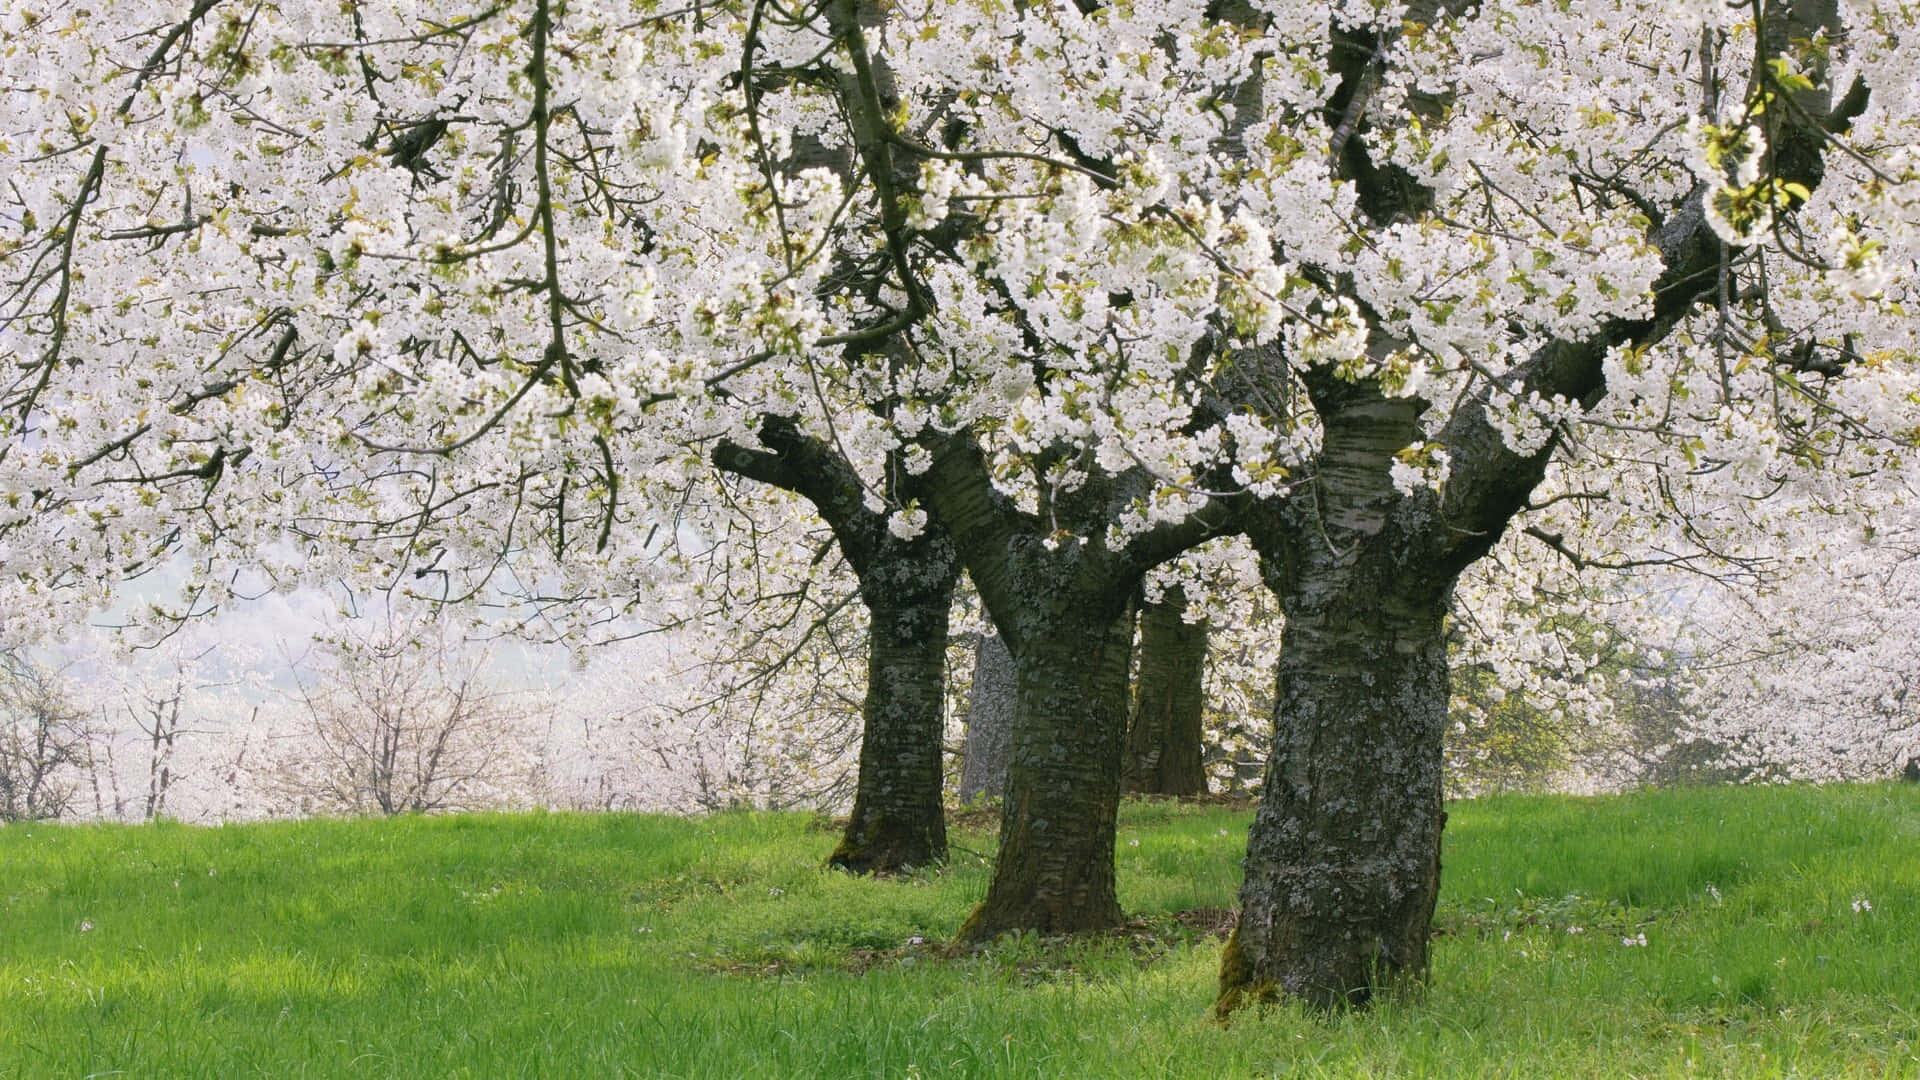 A Group Of Trees With White Blossoms In The Grass